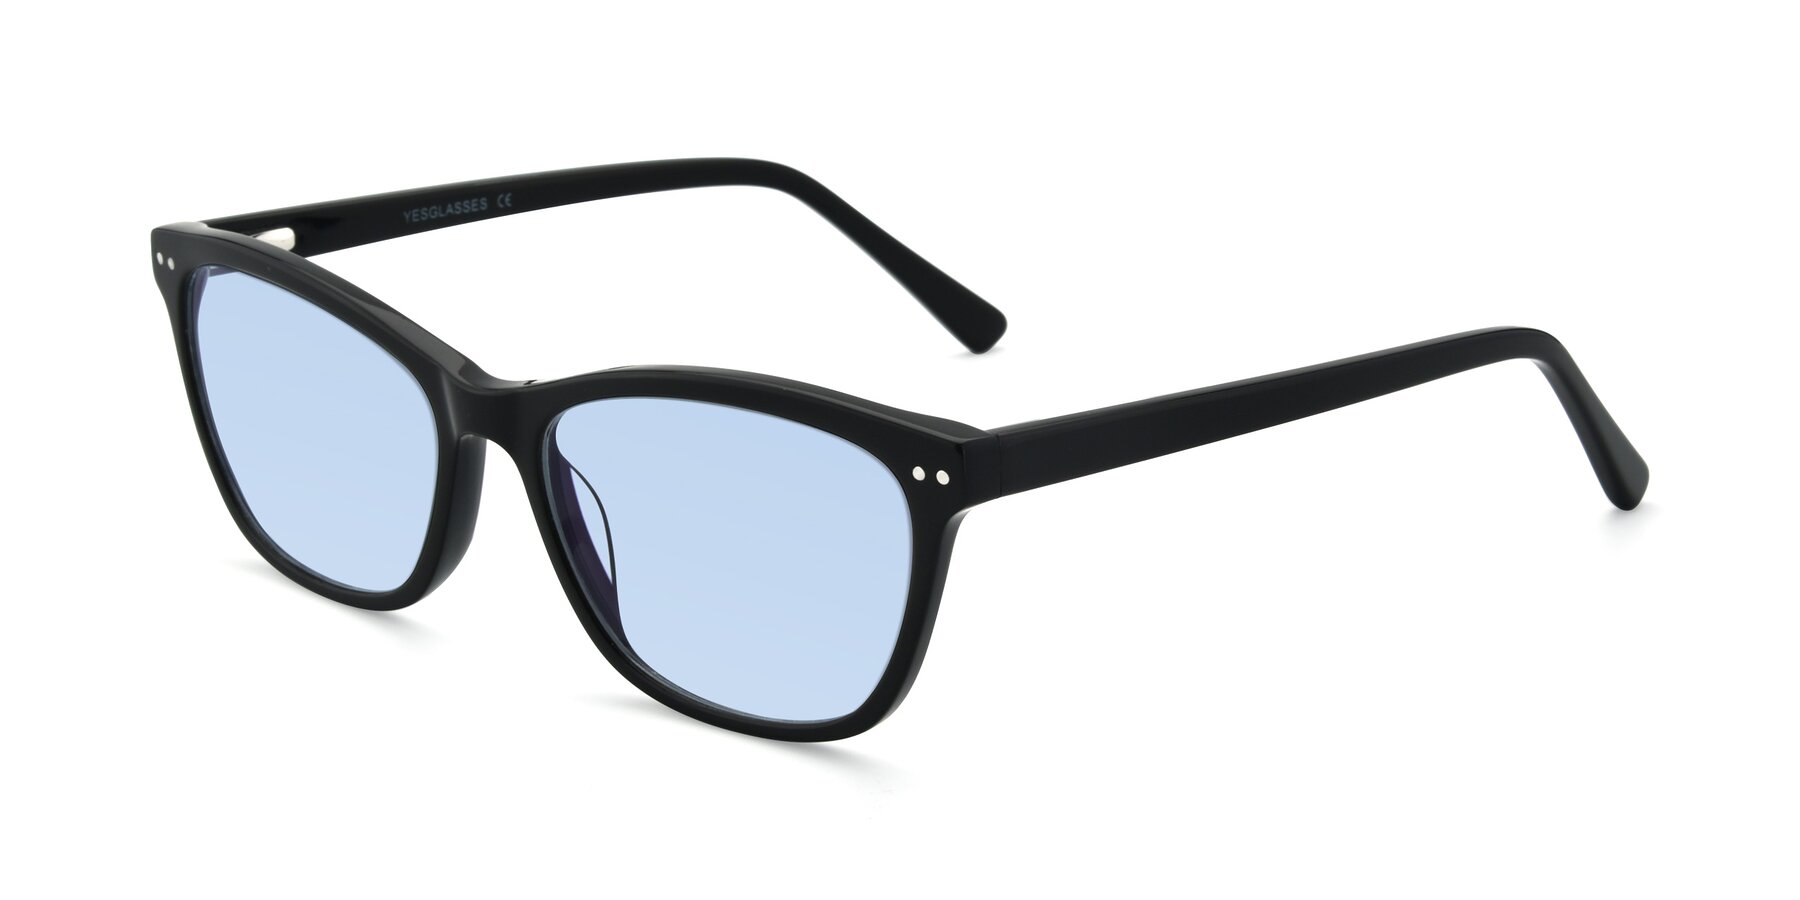 Angle of 17350 in Black with Light Blue Tinted Lenses